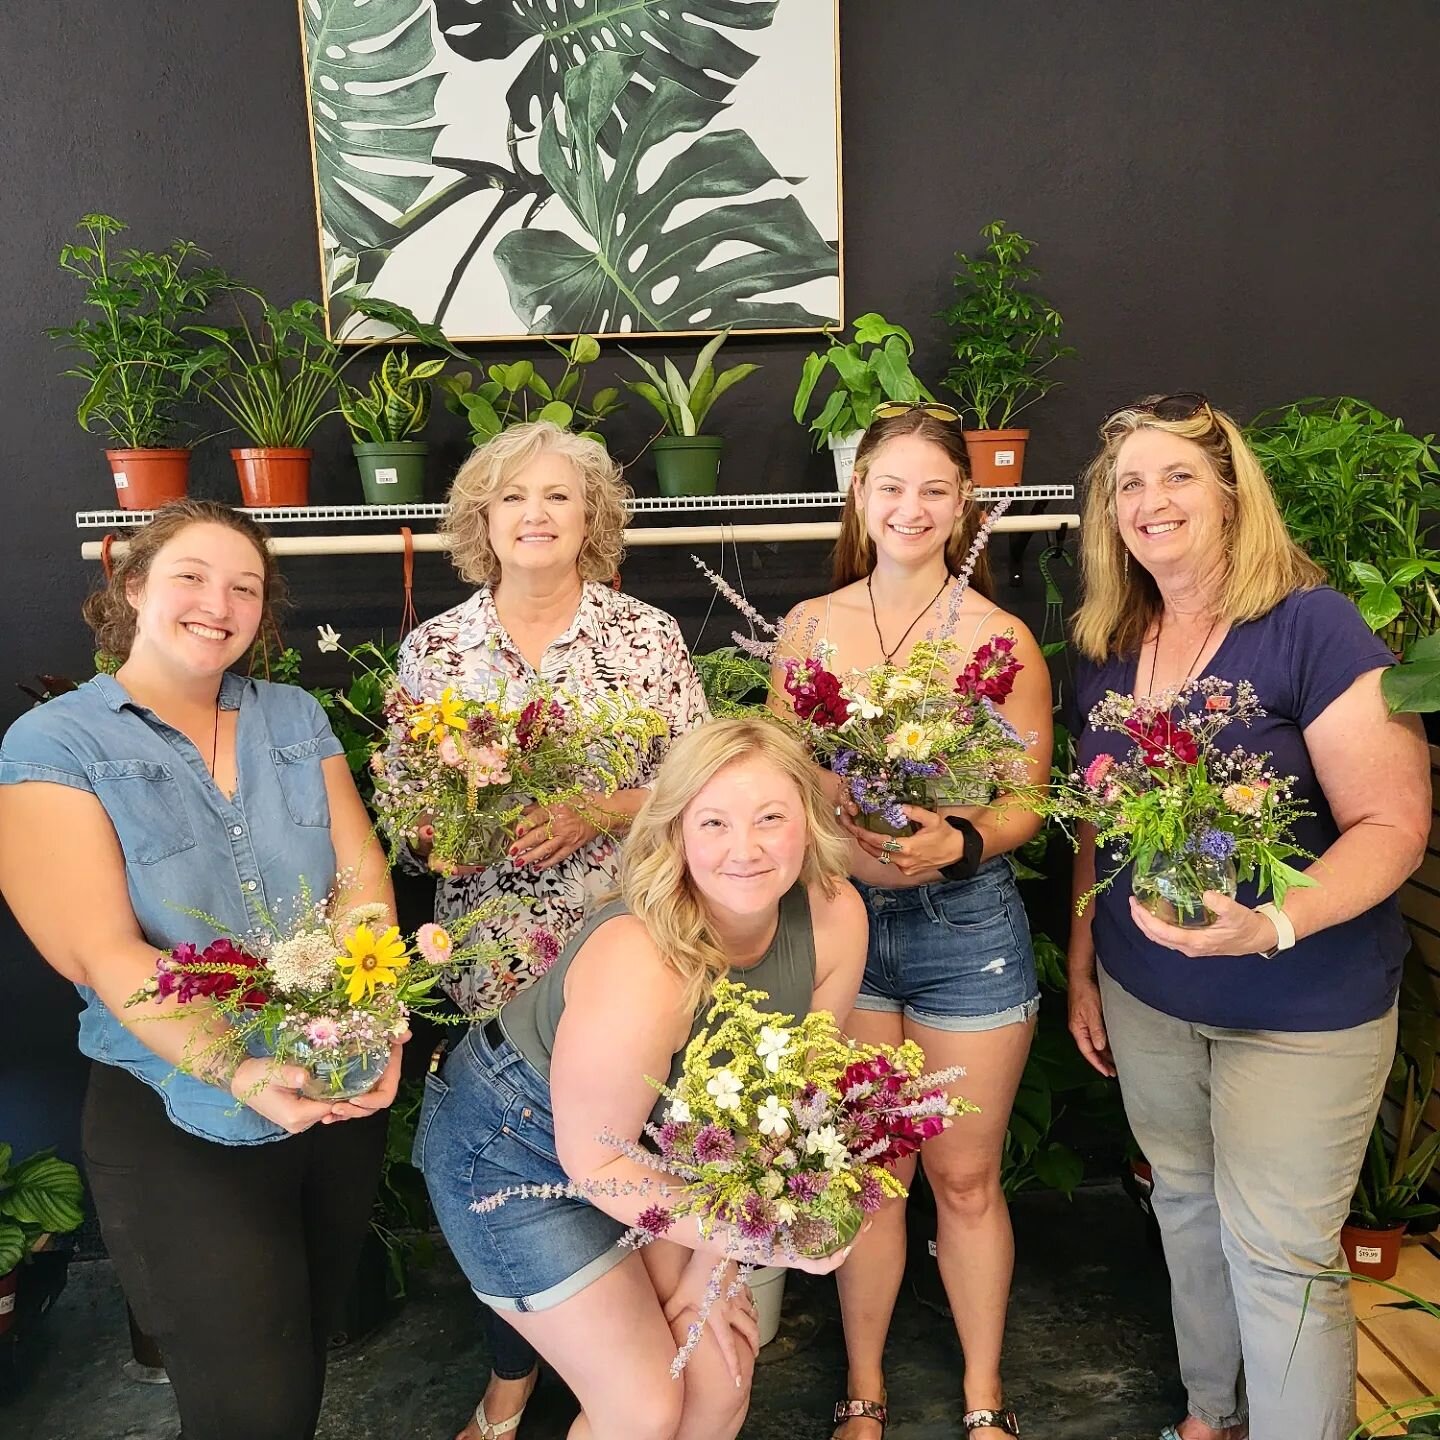 If you weren't here at our class tonight with @together.webloom you seriously missed out.

This floral arrangement class with local fresh cut flowers was seriously a dream. 

Thanks for supporting these two women owned businesses - we appreciate you!